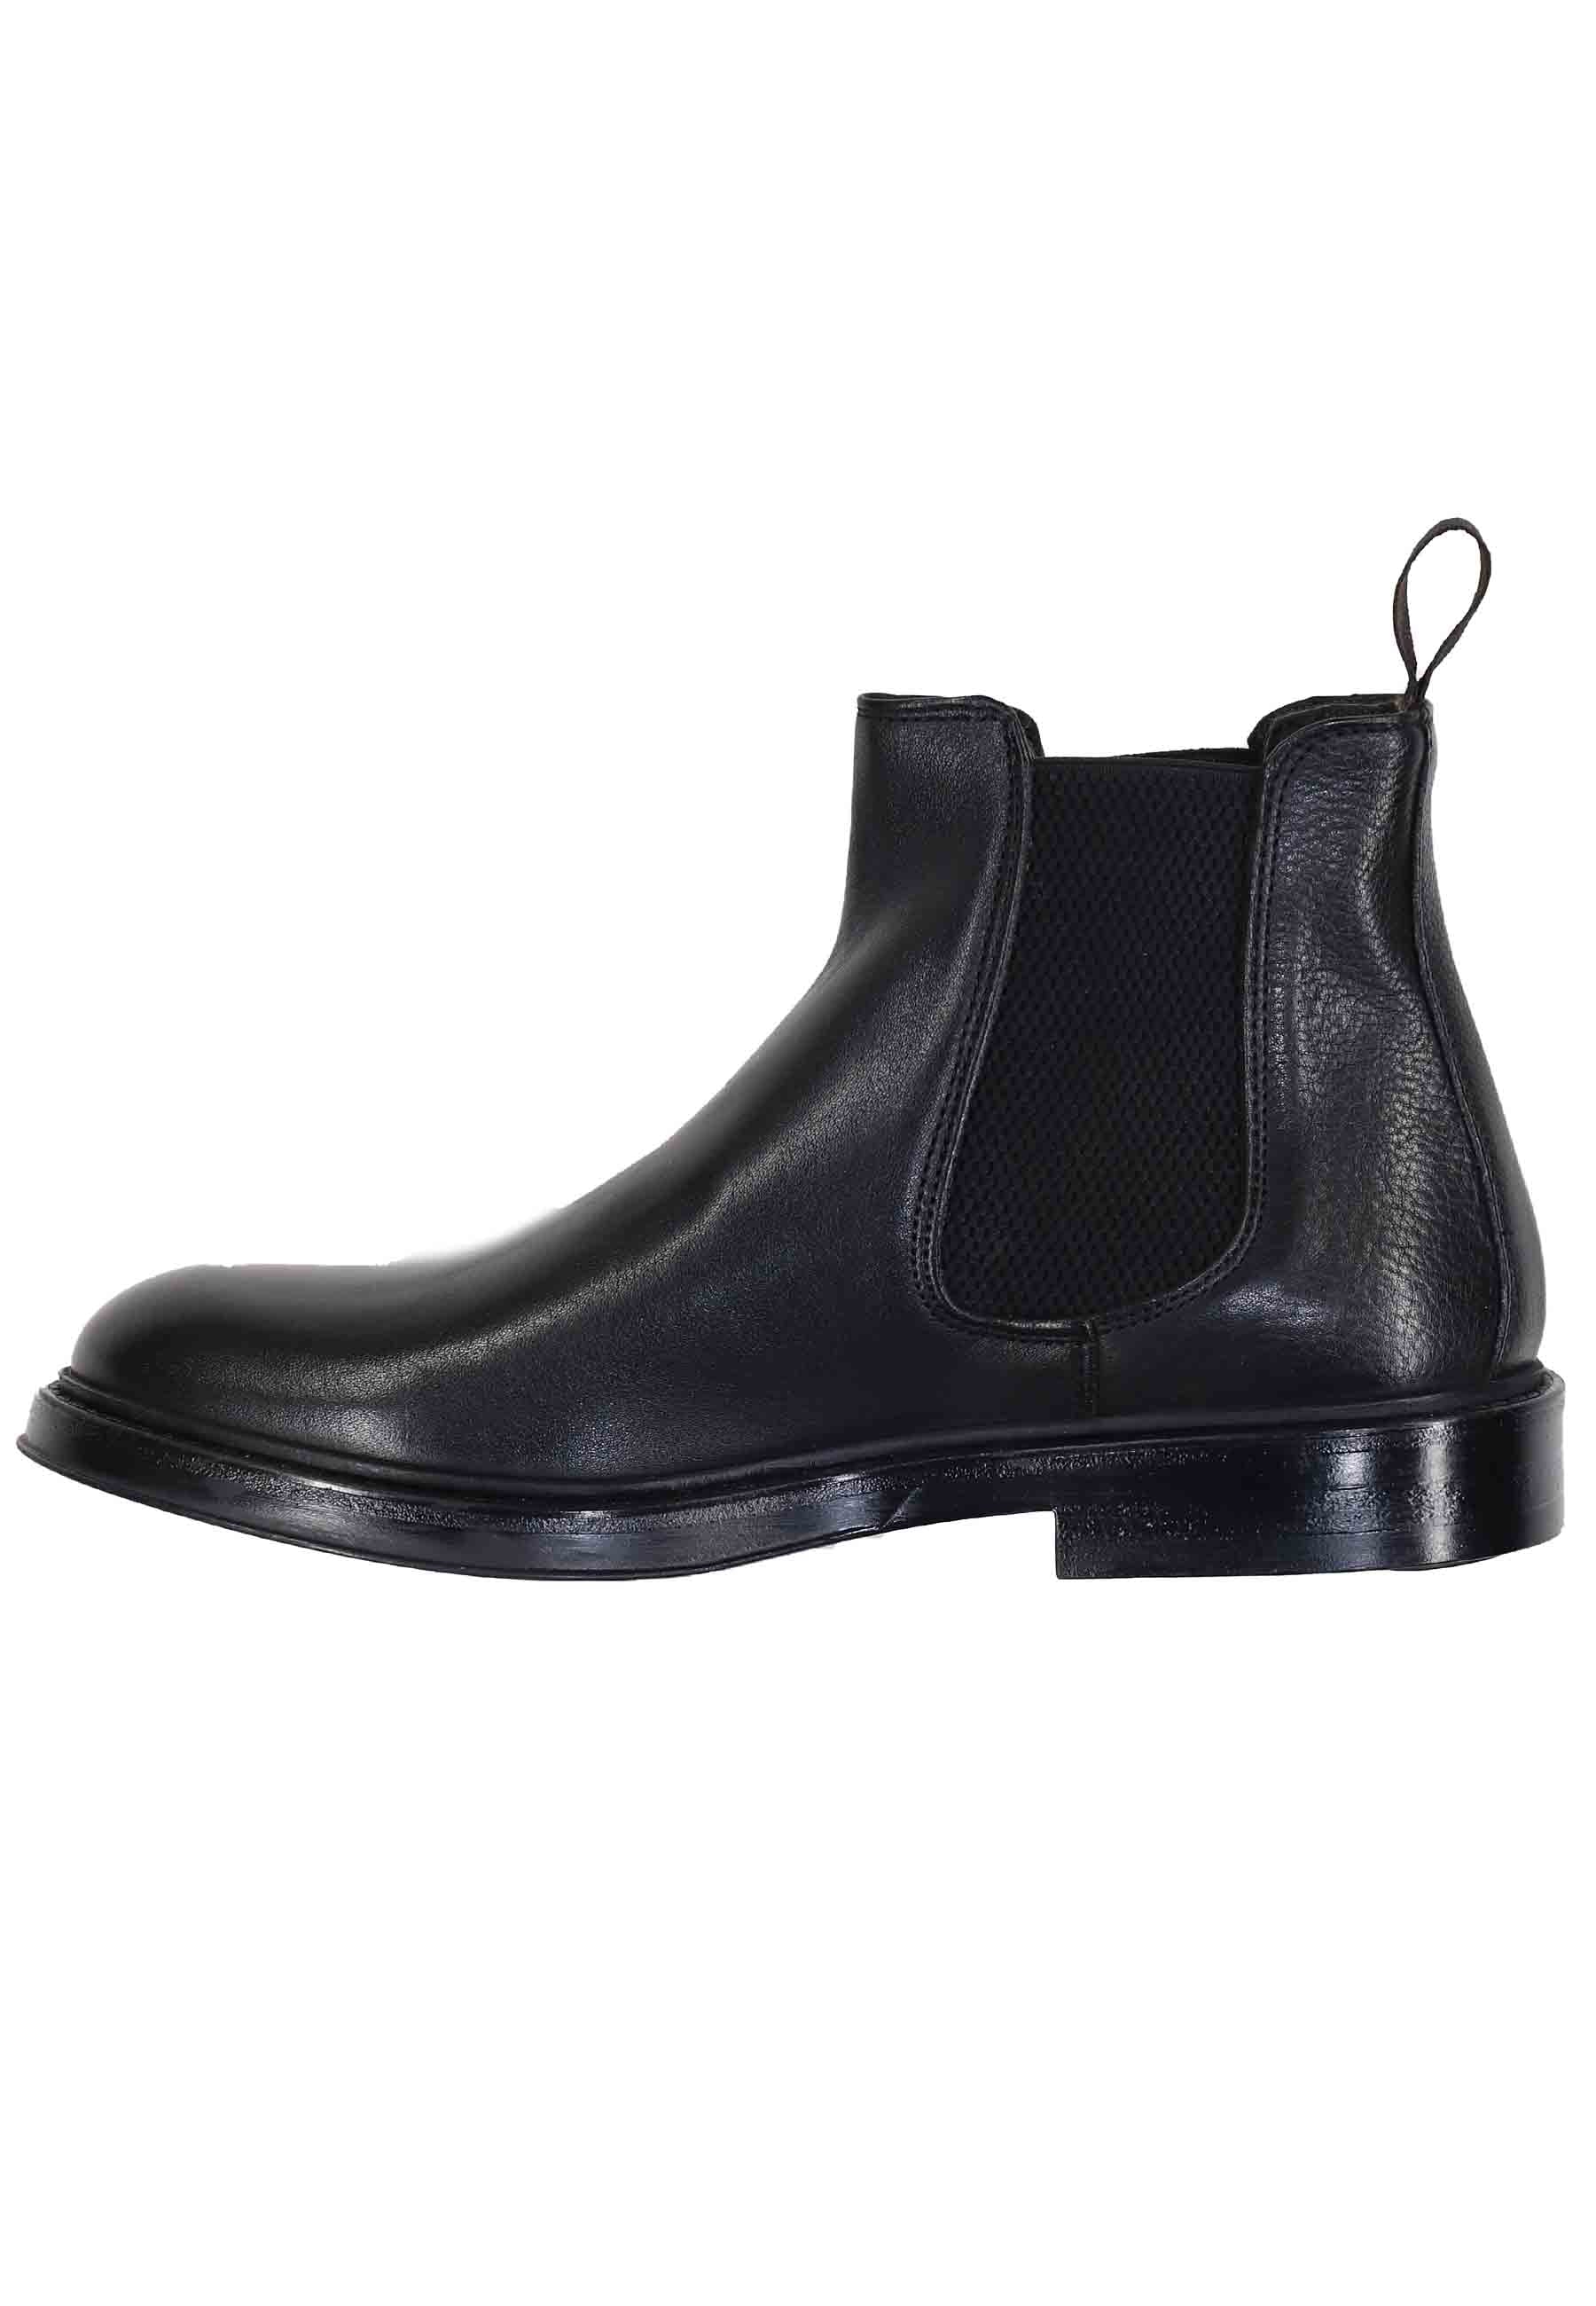 Bealtles ankle boots in black leather with round toe rubber sole